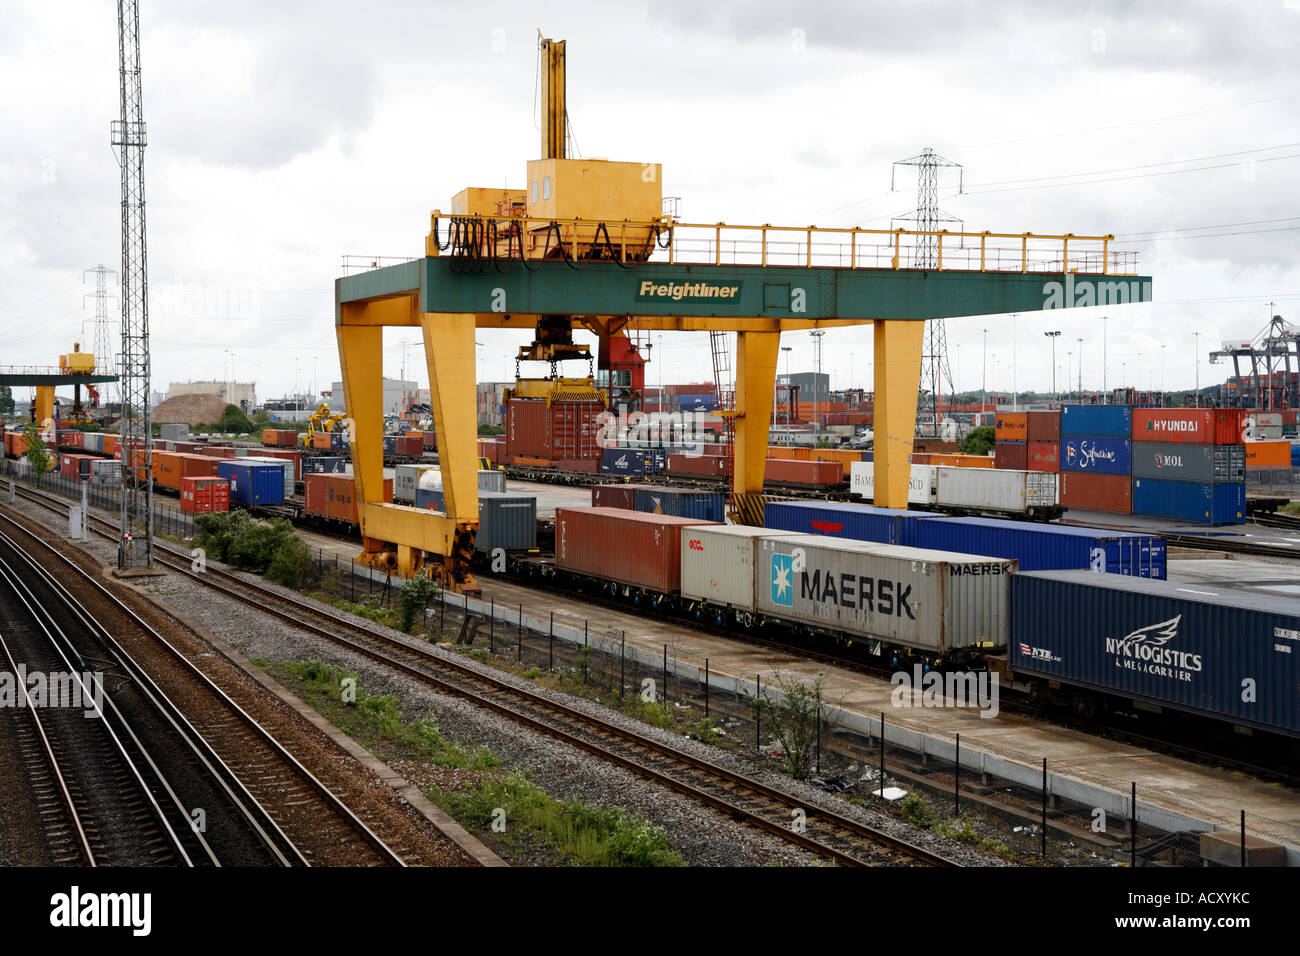 Rail mounted crane loading containers from rail carriages onto truck at Southampton Docks, England. Stock Photo